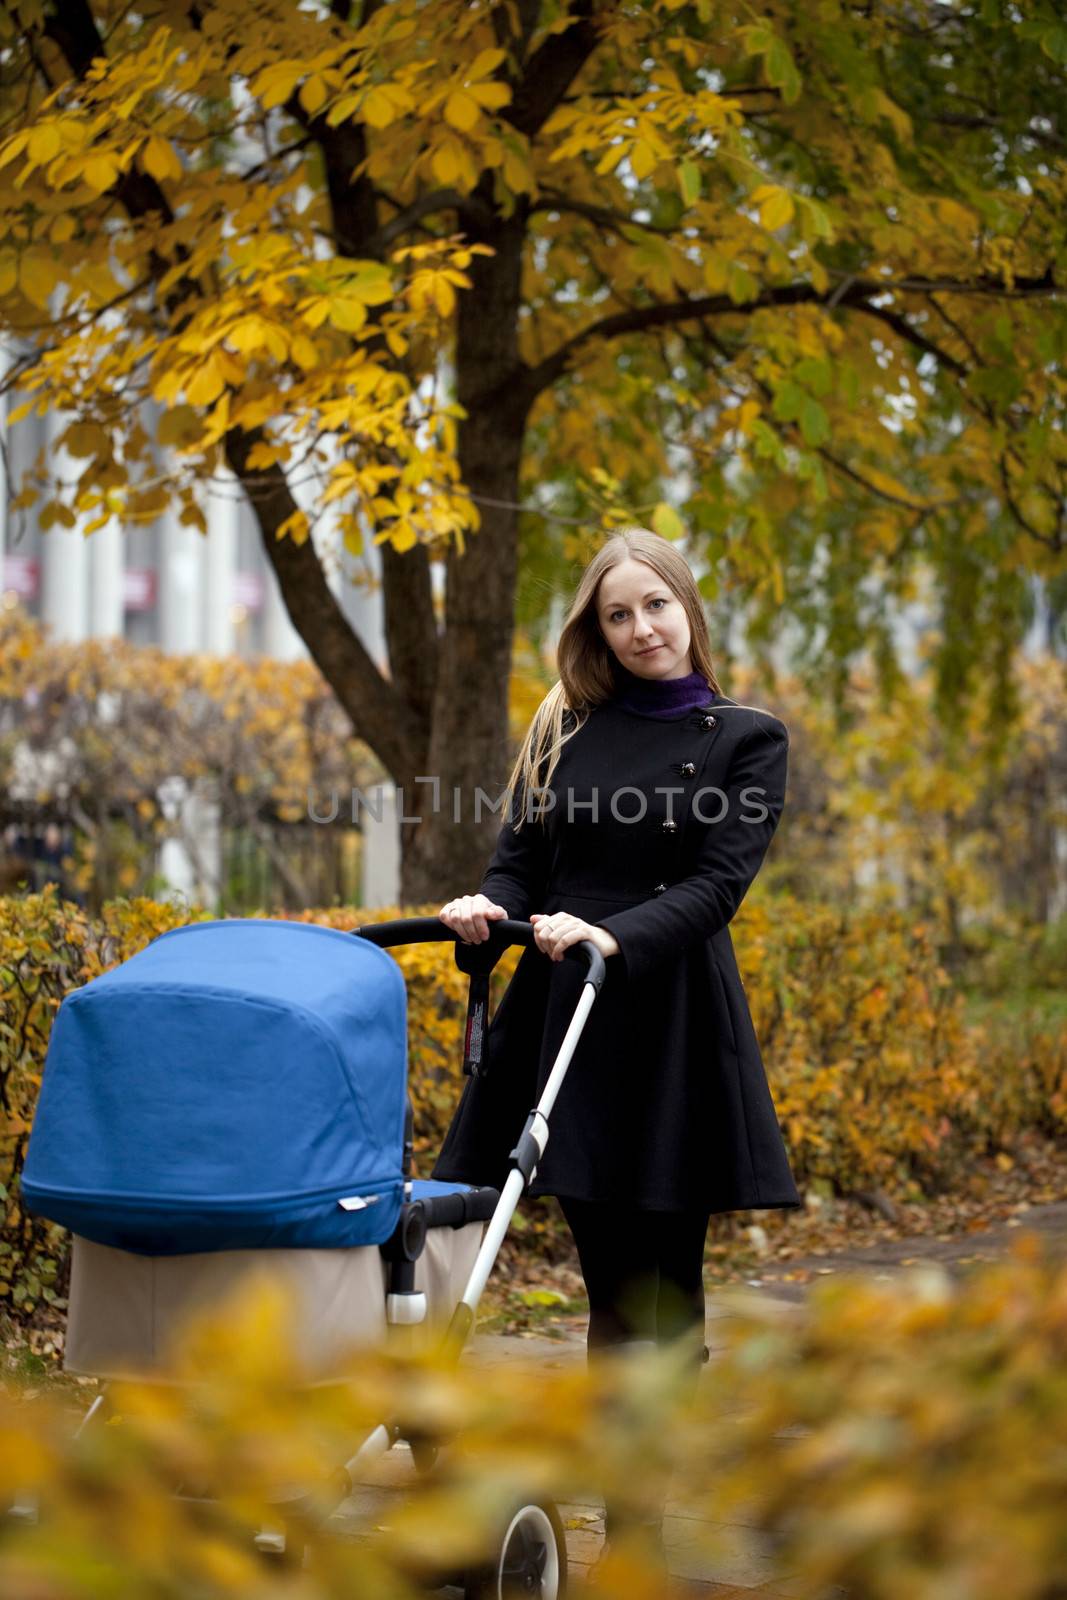 Mother with baby stroller for a newborn by andersonrise